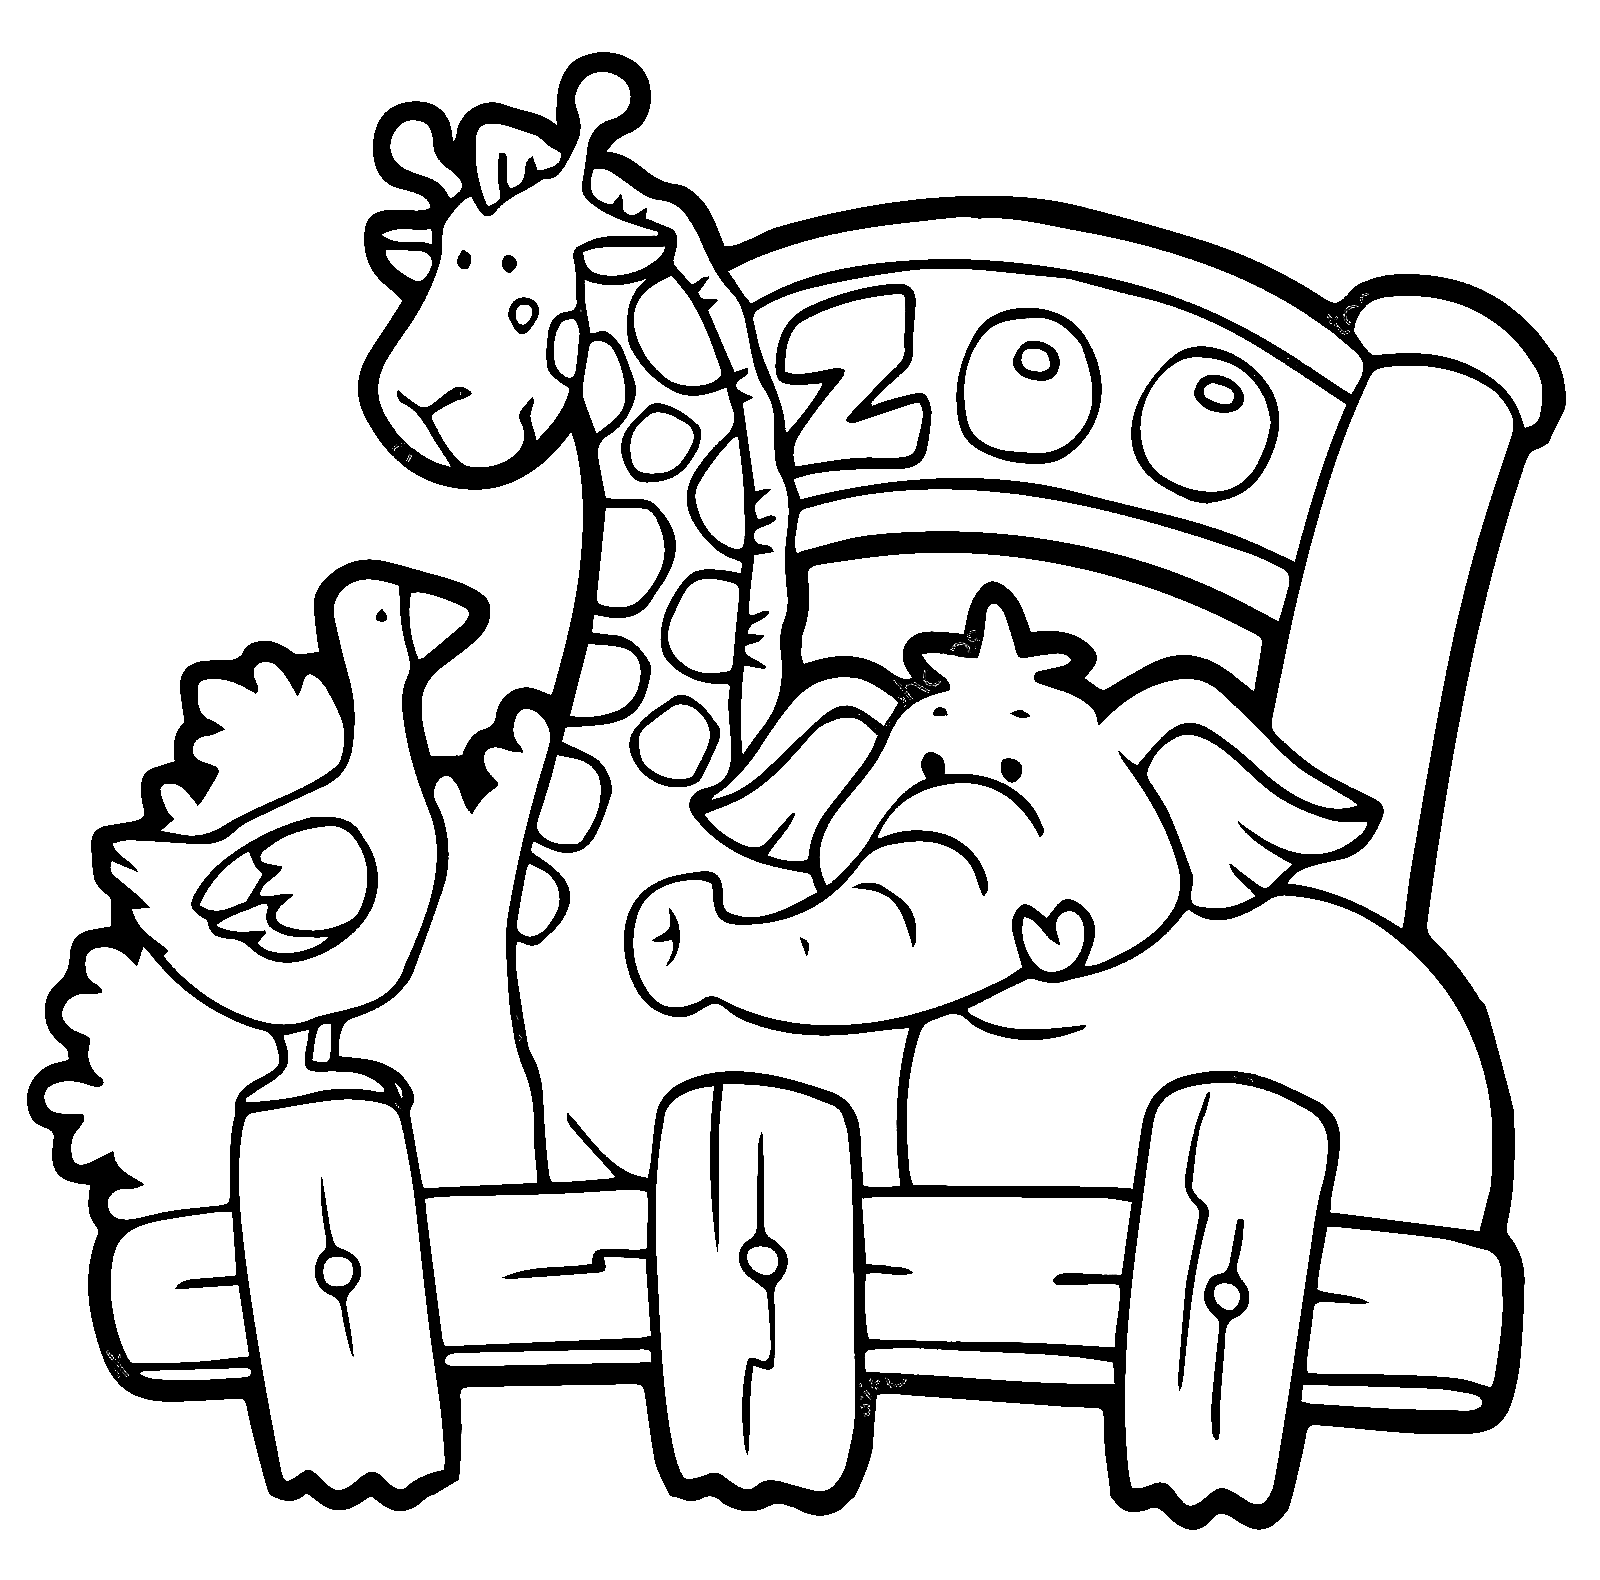 printable-28-zoo-animal-coloring-pages-sheets-coloringbase-zoo